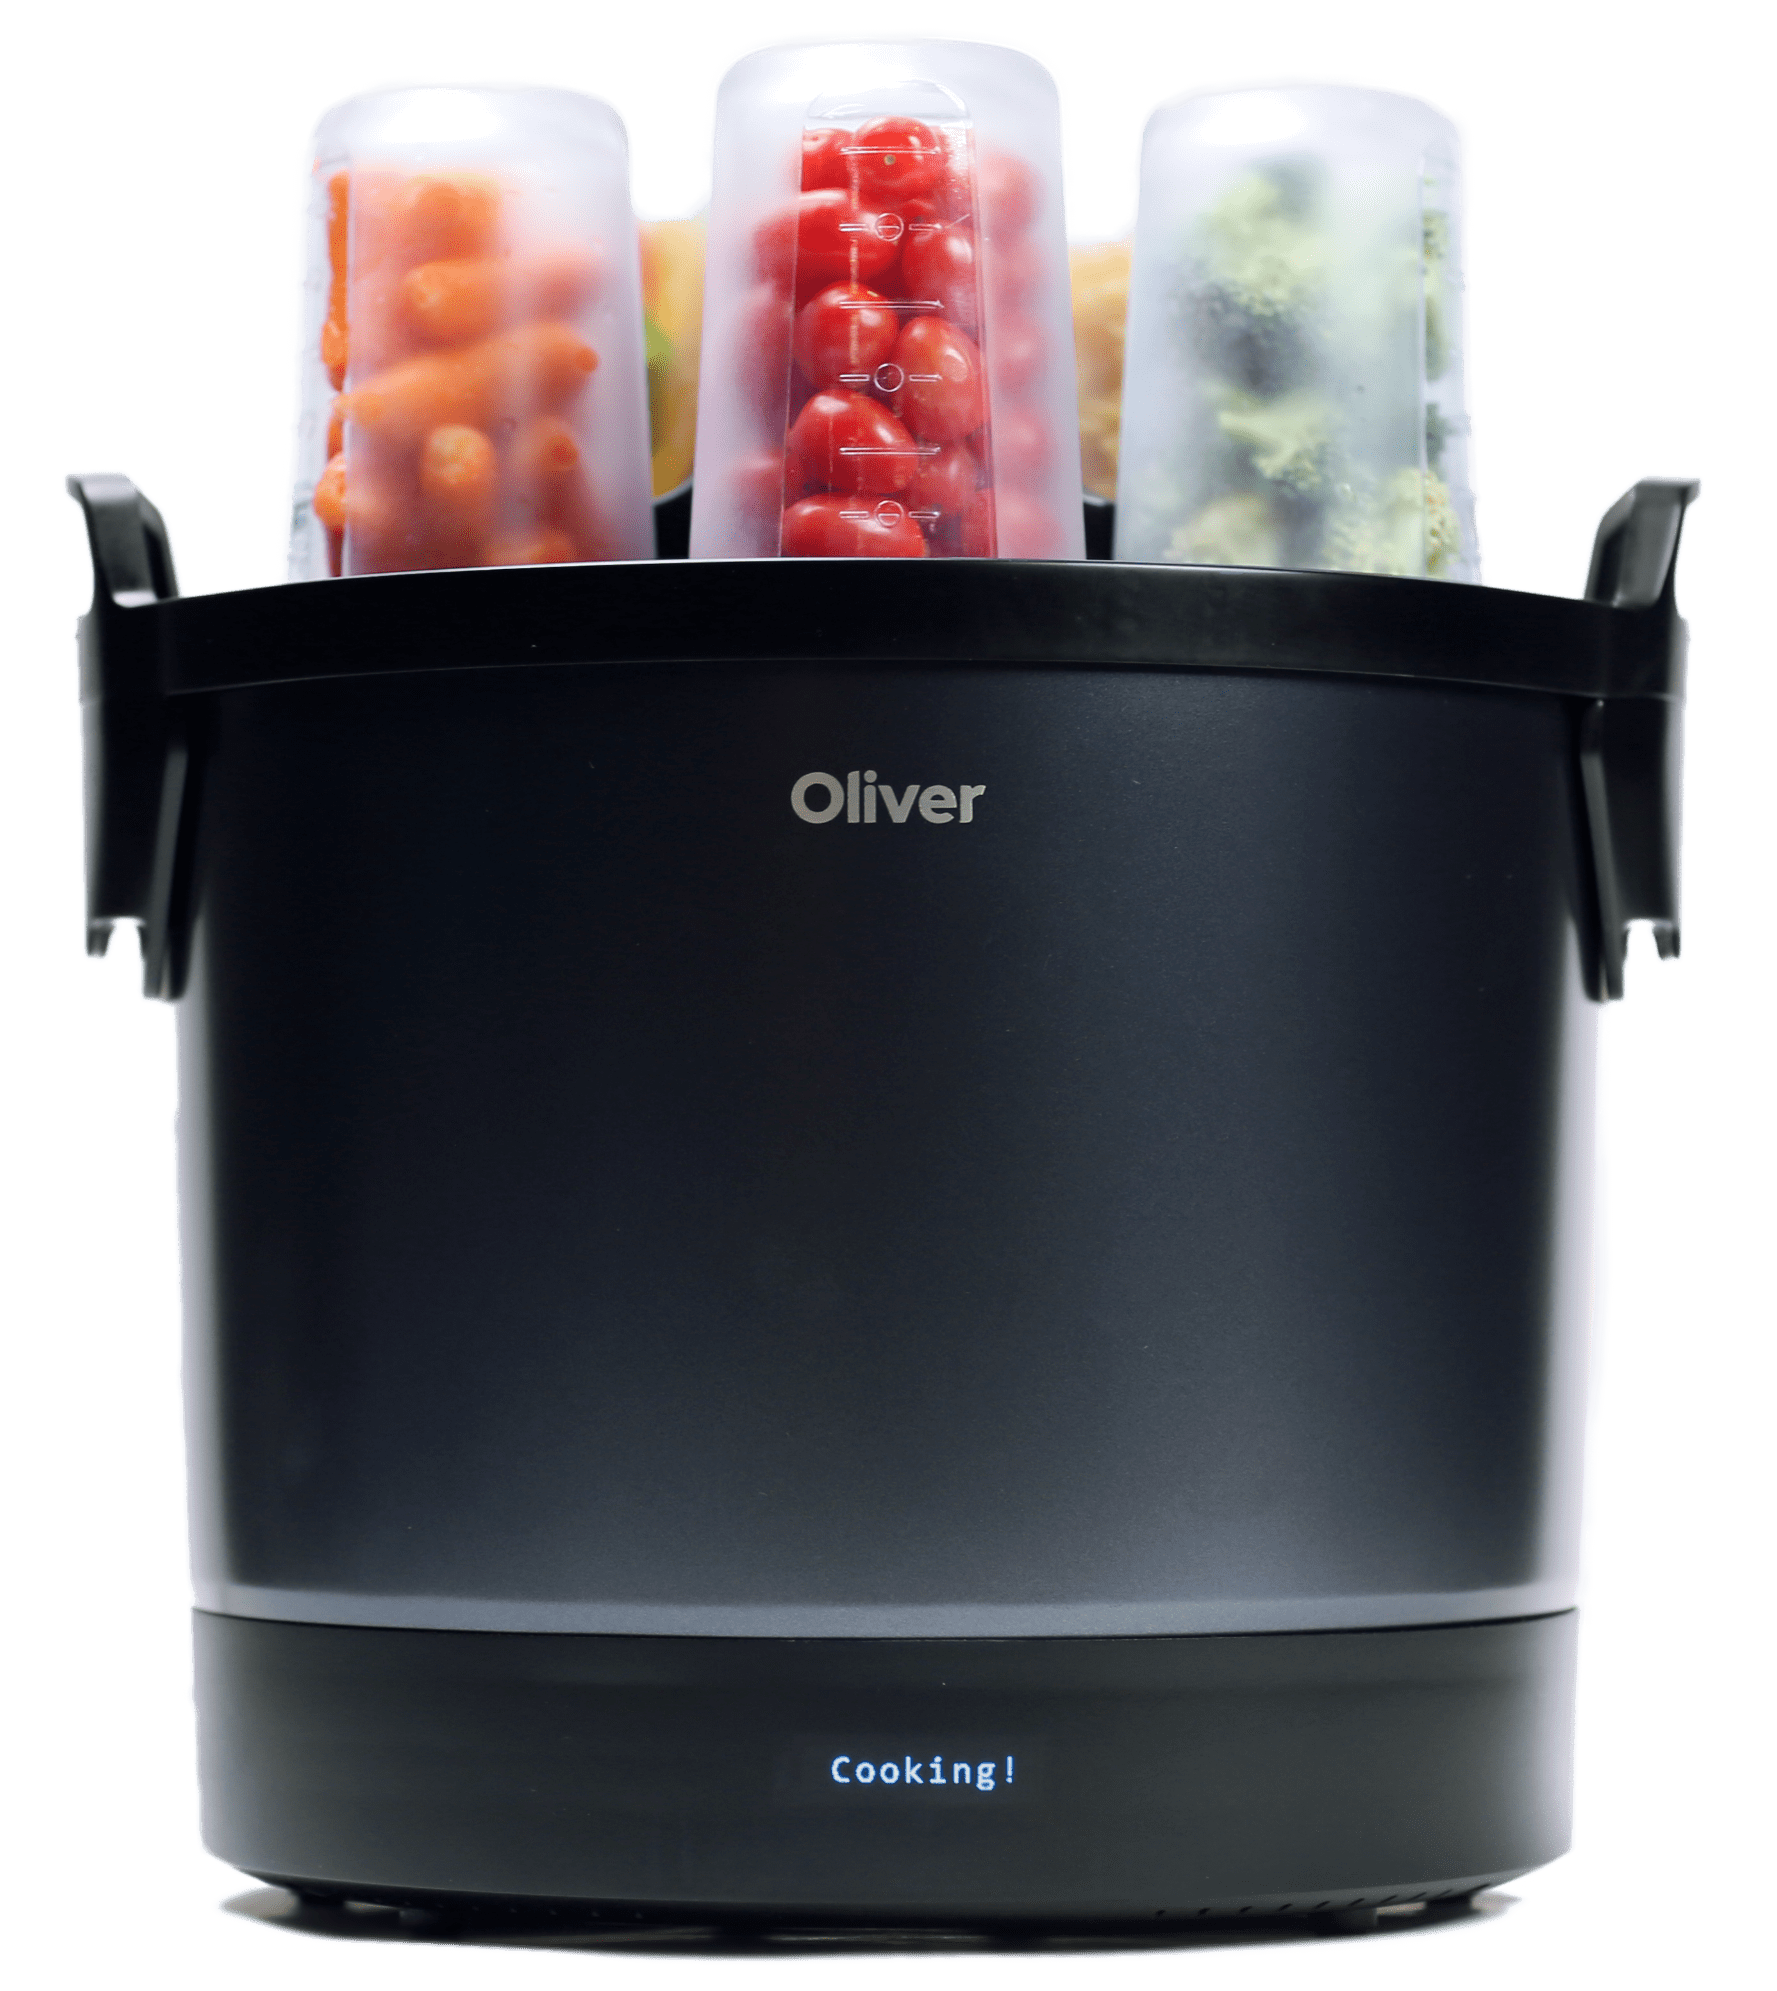 Front profile view of the black Oliver unit (smart Kitchen robot) jars full of ingredients. Oliver is a smart kitchen appliance.